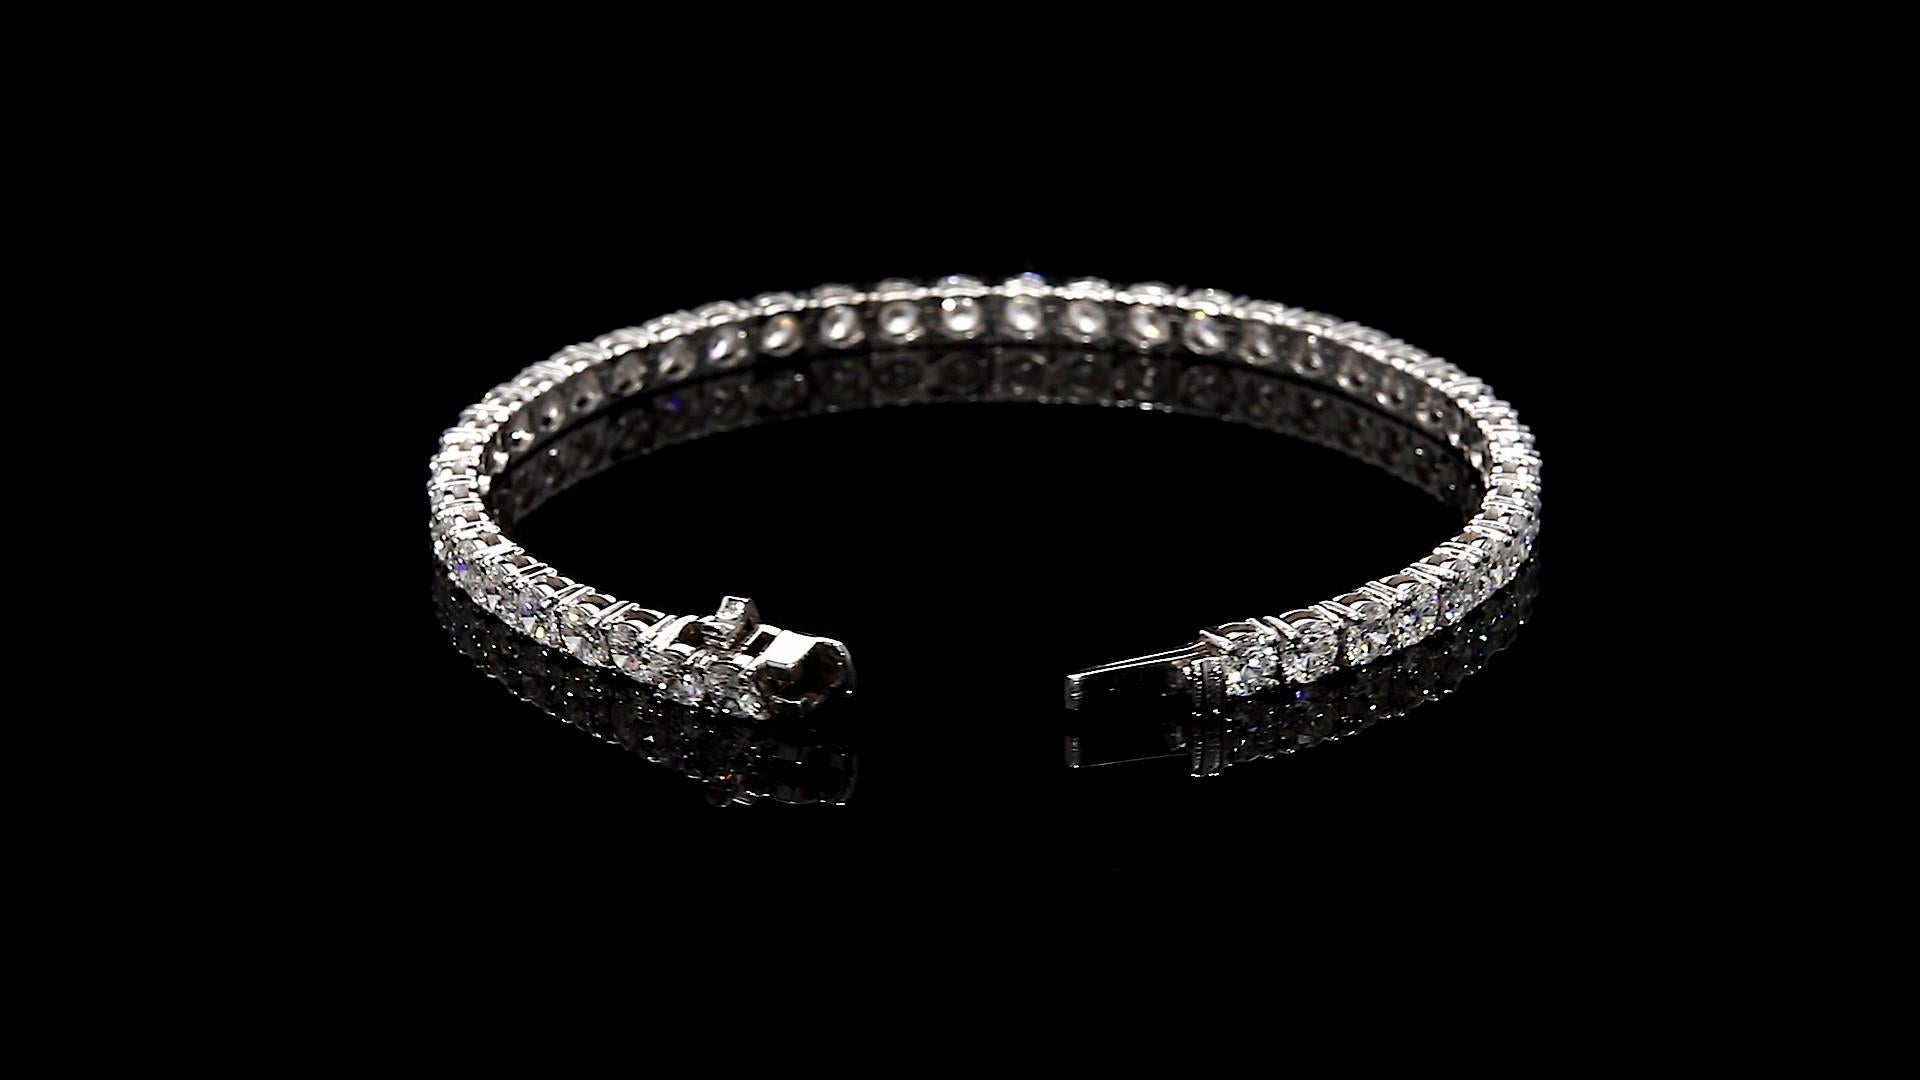 Diamond Tennis Bracelet 5.01 Total Carat Weight 18K White Gold

With Round Diamonds, 0.08 Carats Each 

Diamonds are DEF in Color and VS2 in Clarity

Total Carat Weight is 5.01 Carats 

4-Prong Setting

Length: 7.0 inches

Set in 18 Karat White